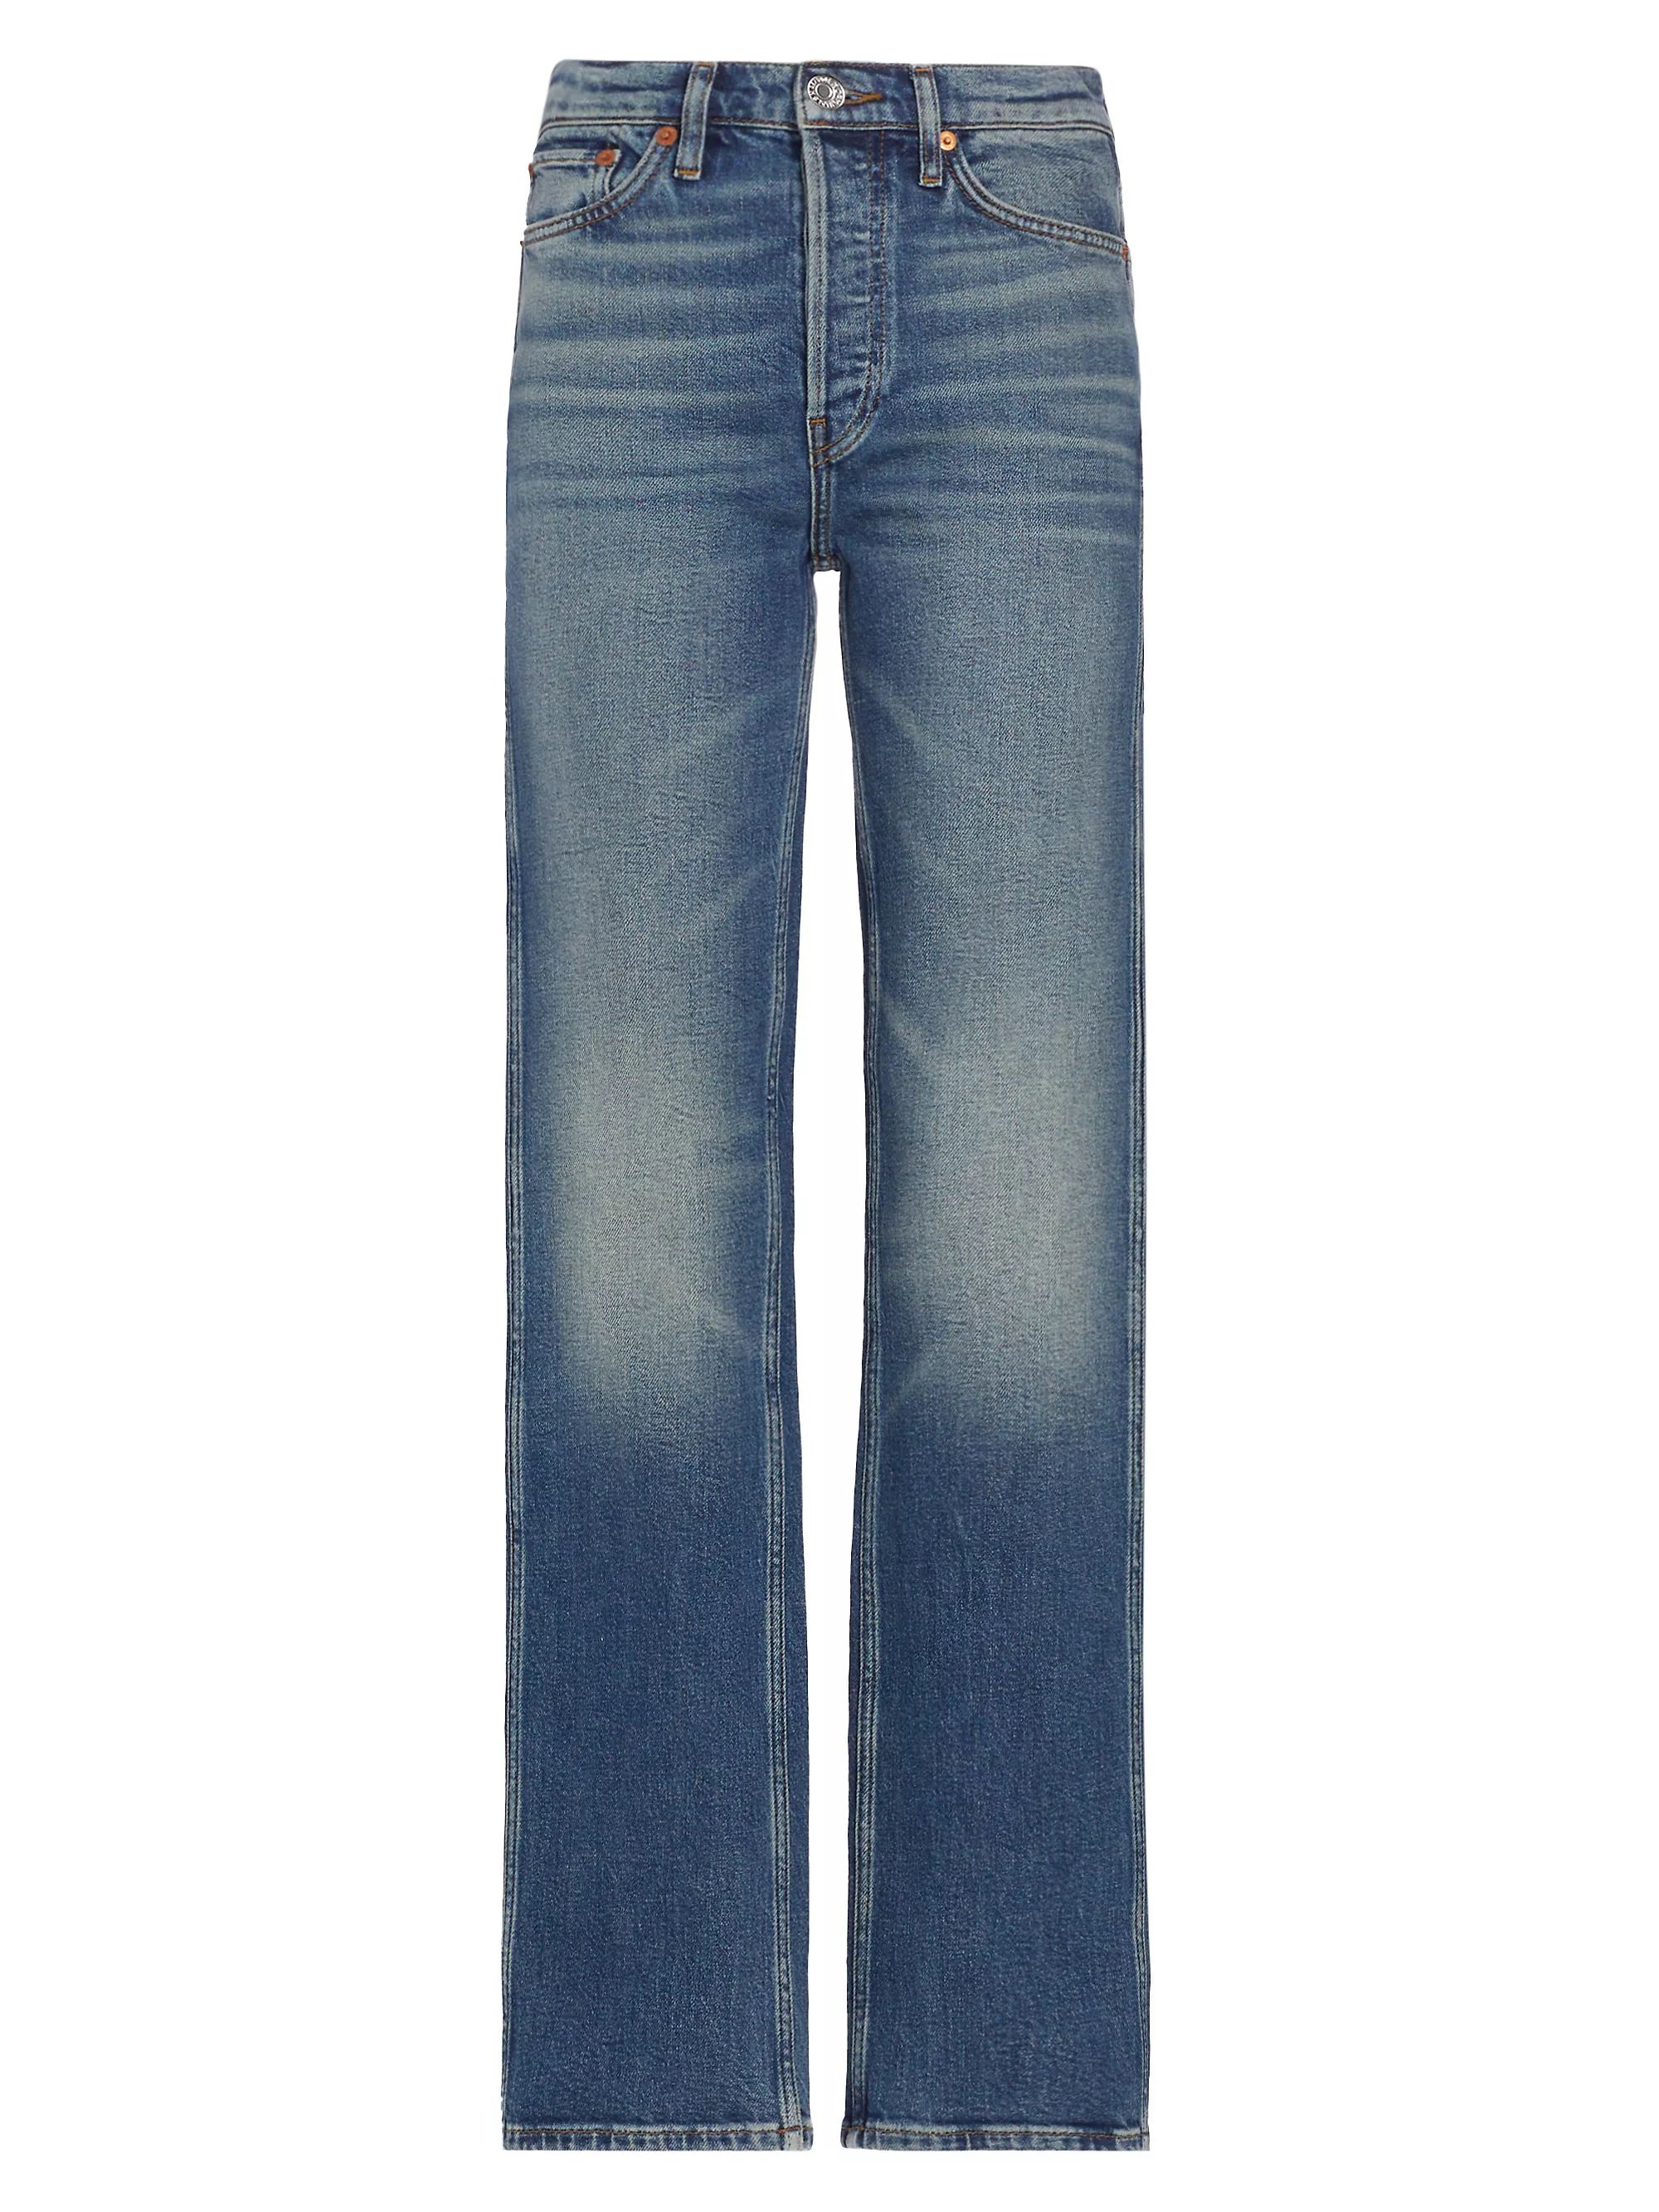 90s Distressed High-Rise Loose-Fit Jeans | Saks Fifth Avenue